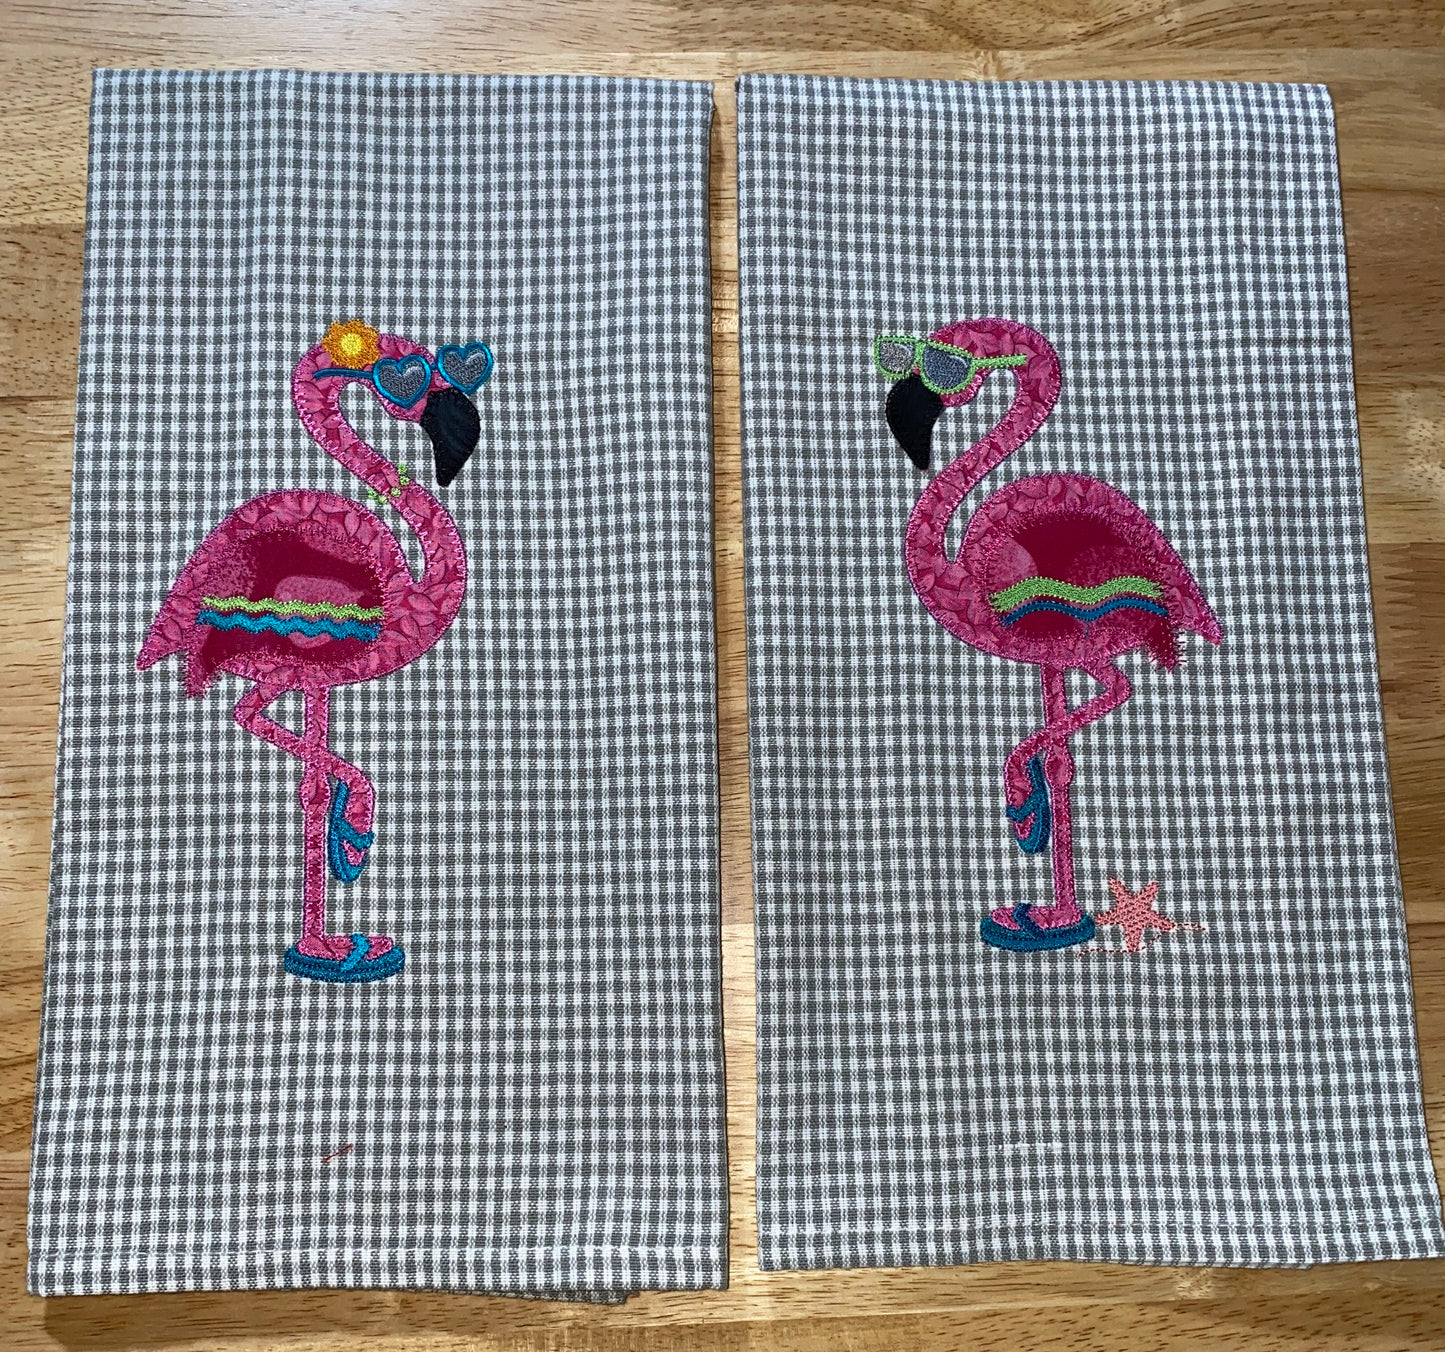 Flamingo Appliqued Dunroven House Towels (Right Towel)